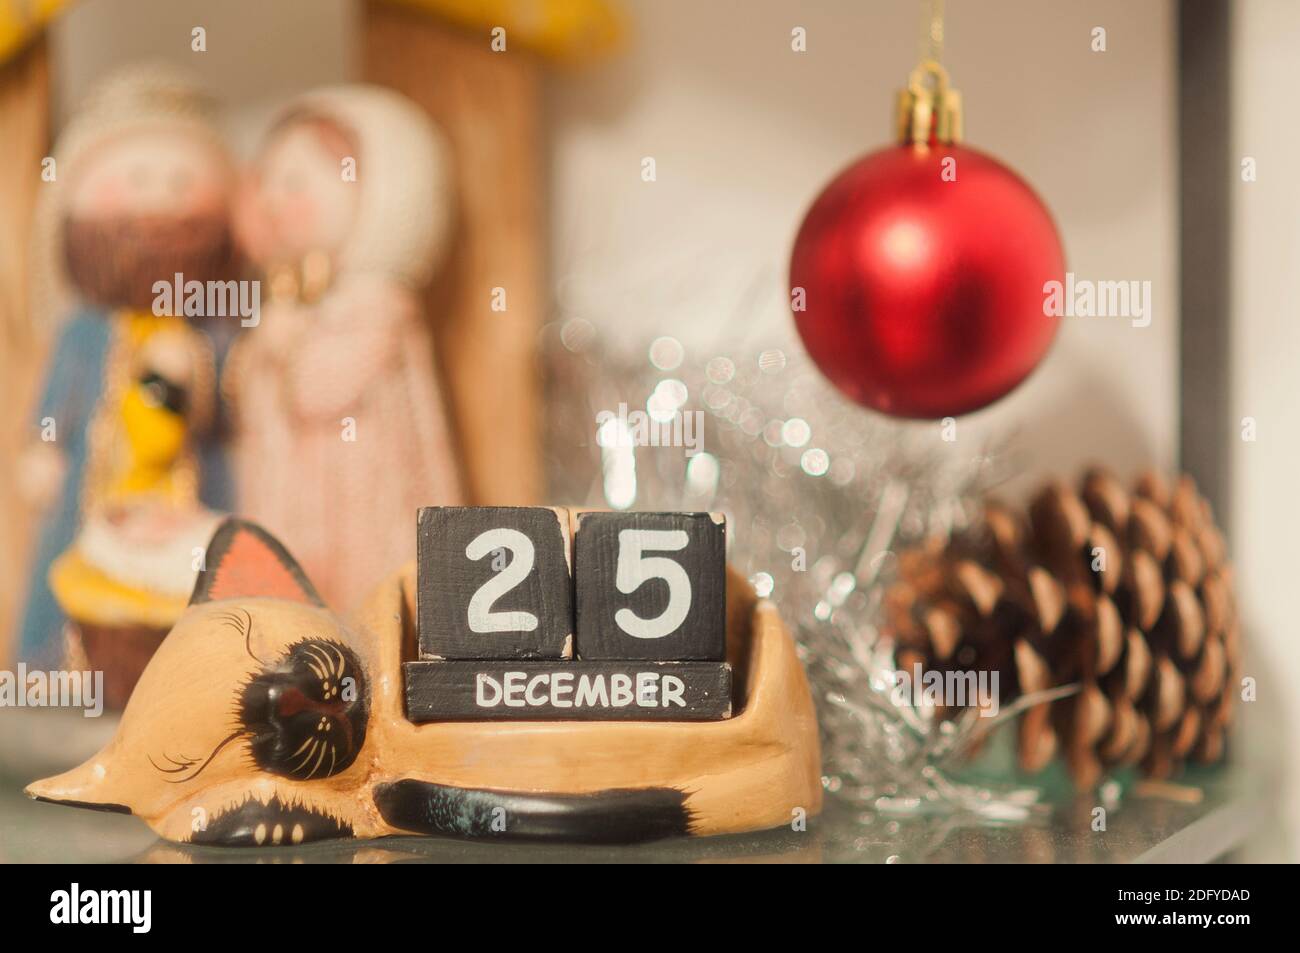 Cat-shaped wooden calendar surrounded by the nativity and other Christmas decorations shows the date of December 25th Stock Photo